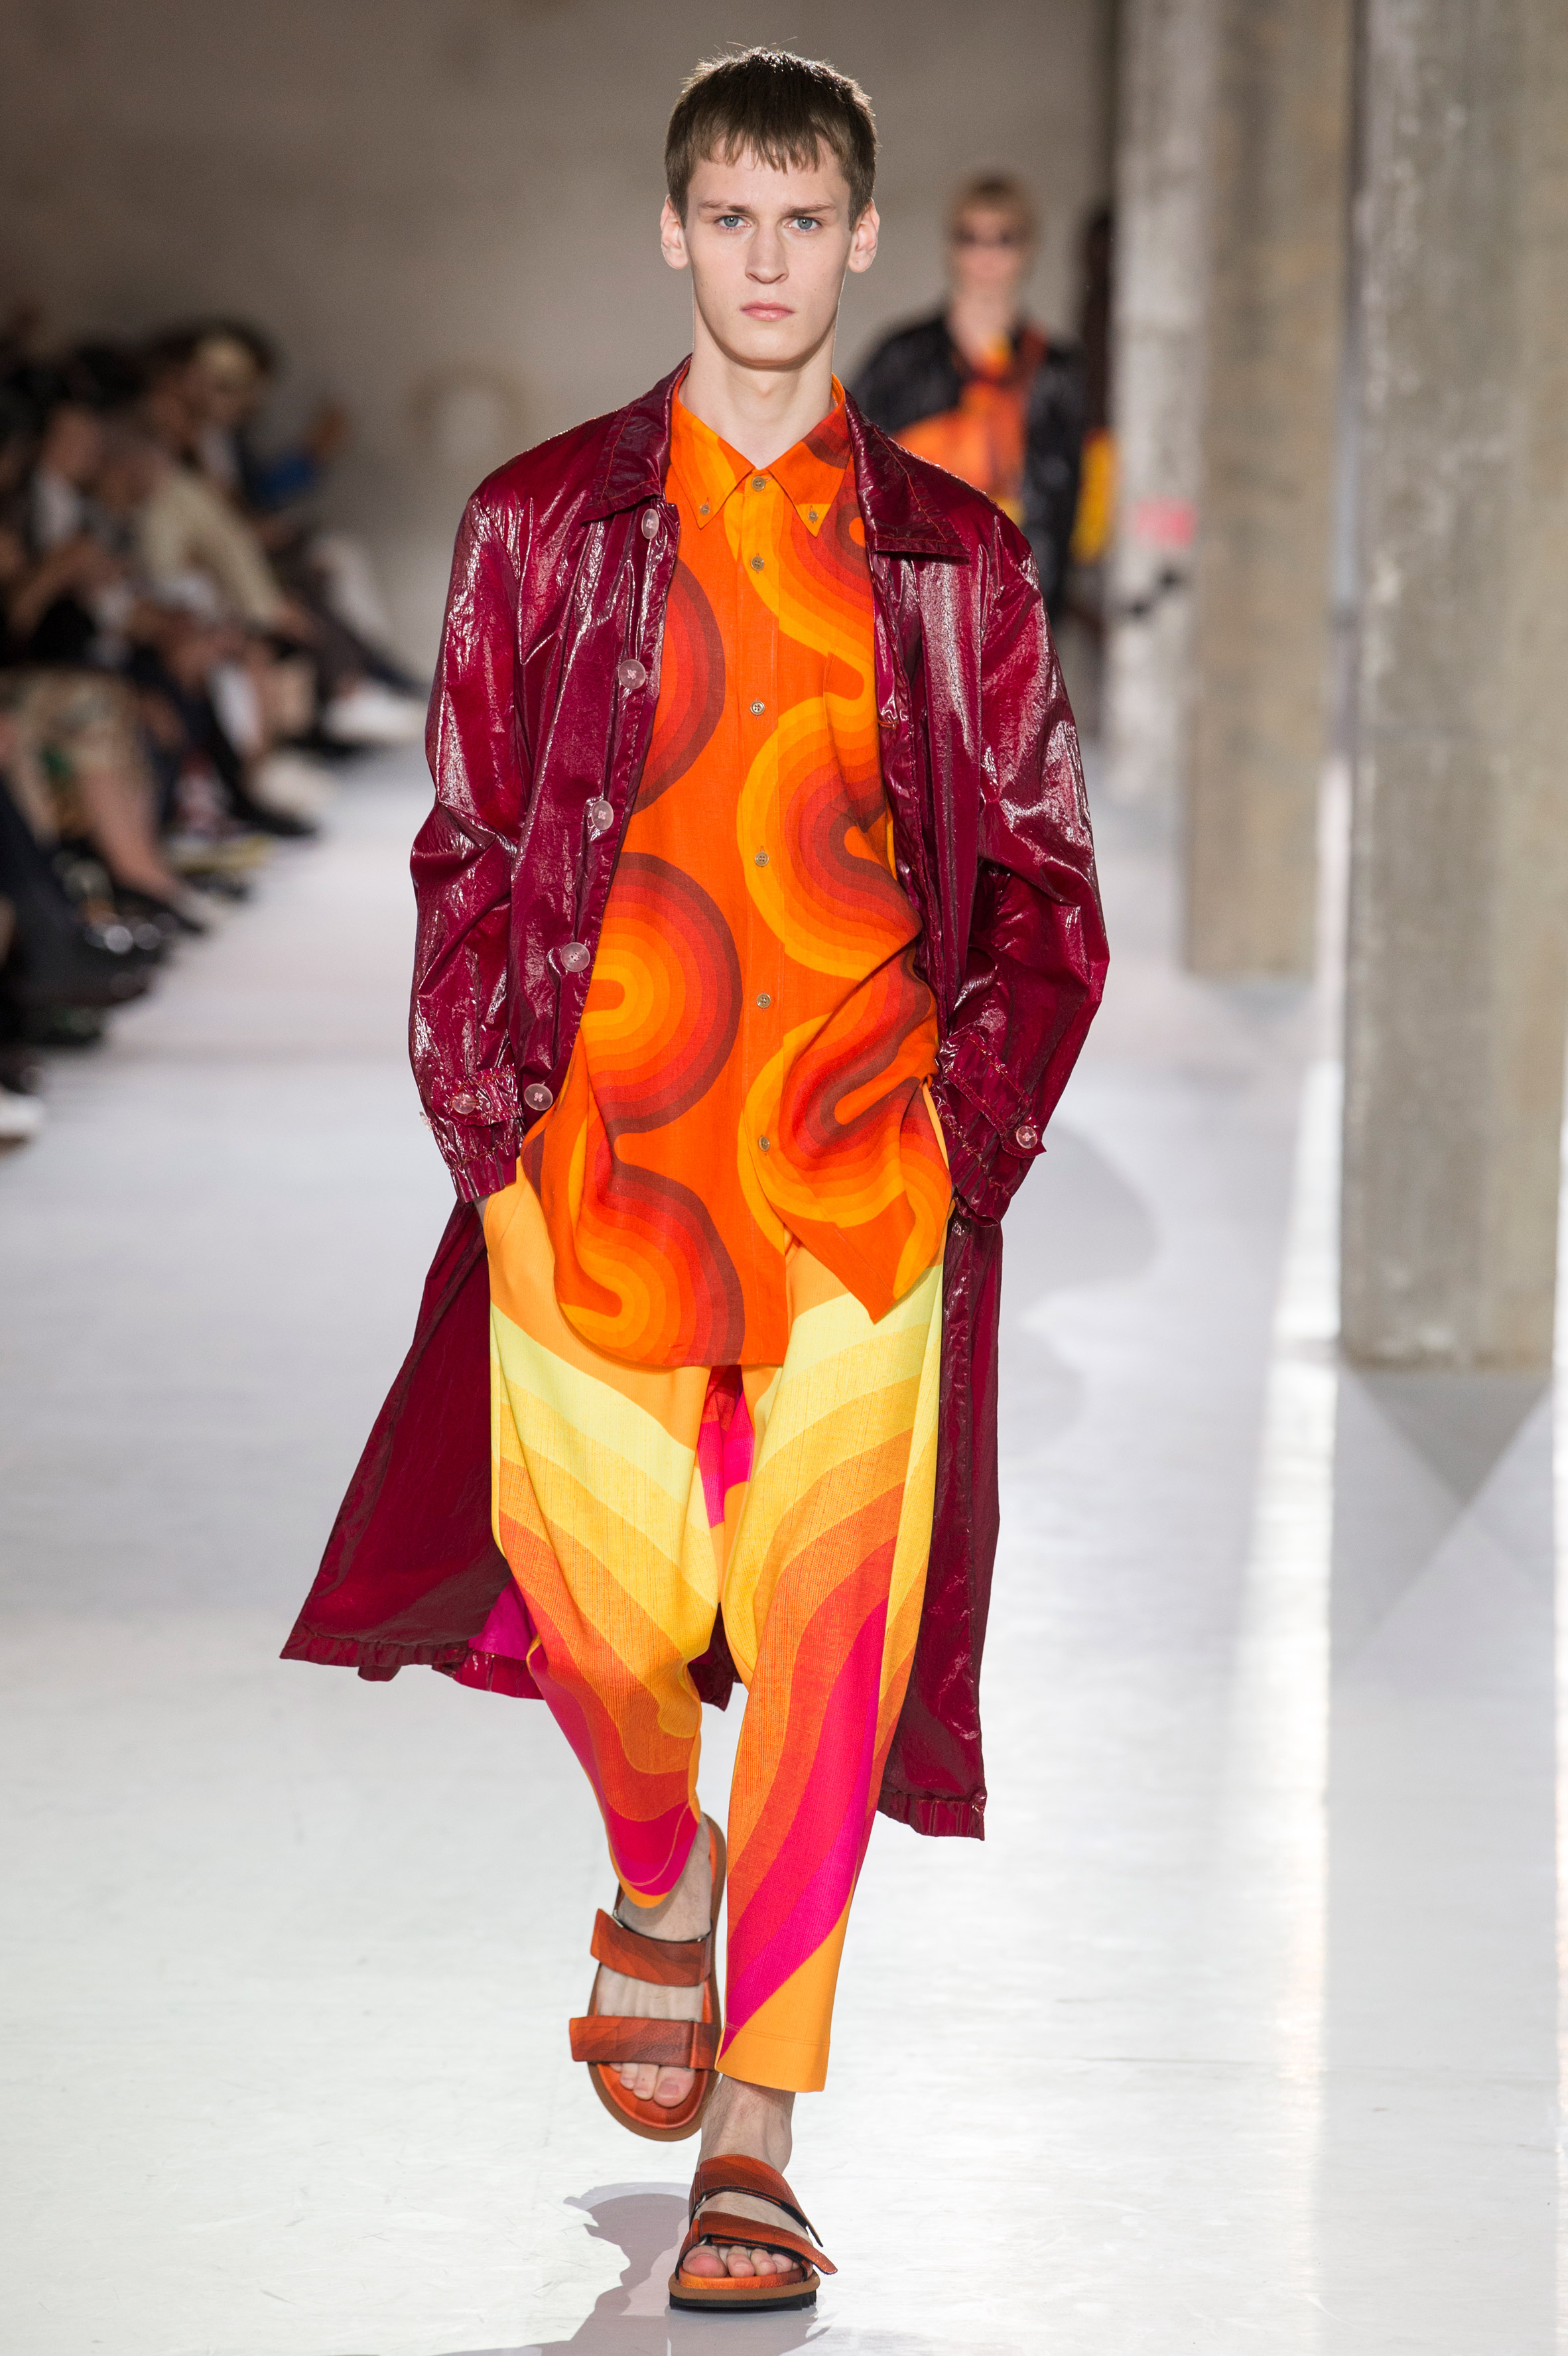 Dries Van Noten pays homage to Verner Panton with colourful SS19